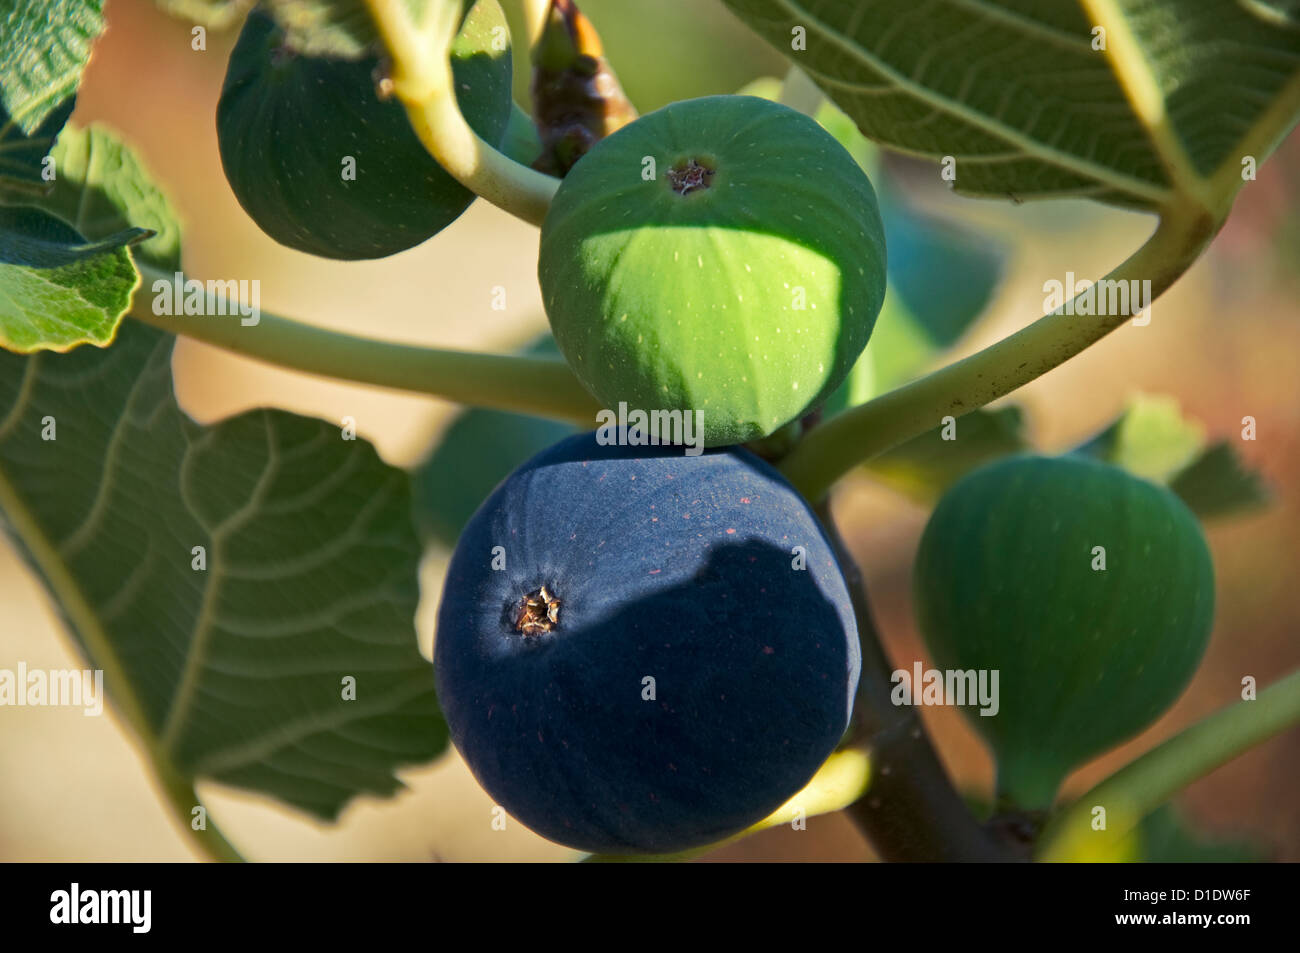 Green and blue figs on the tree (Ficus carica) Stock Photo